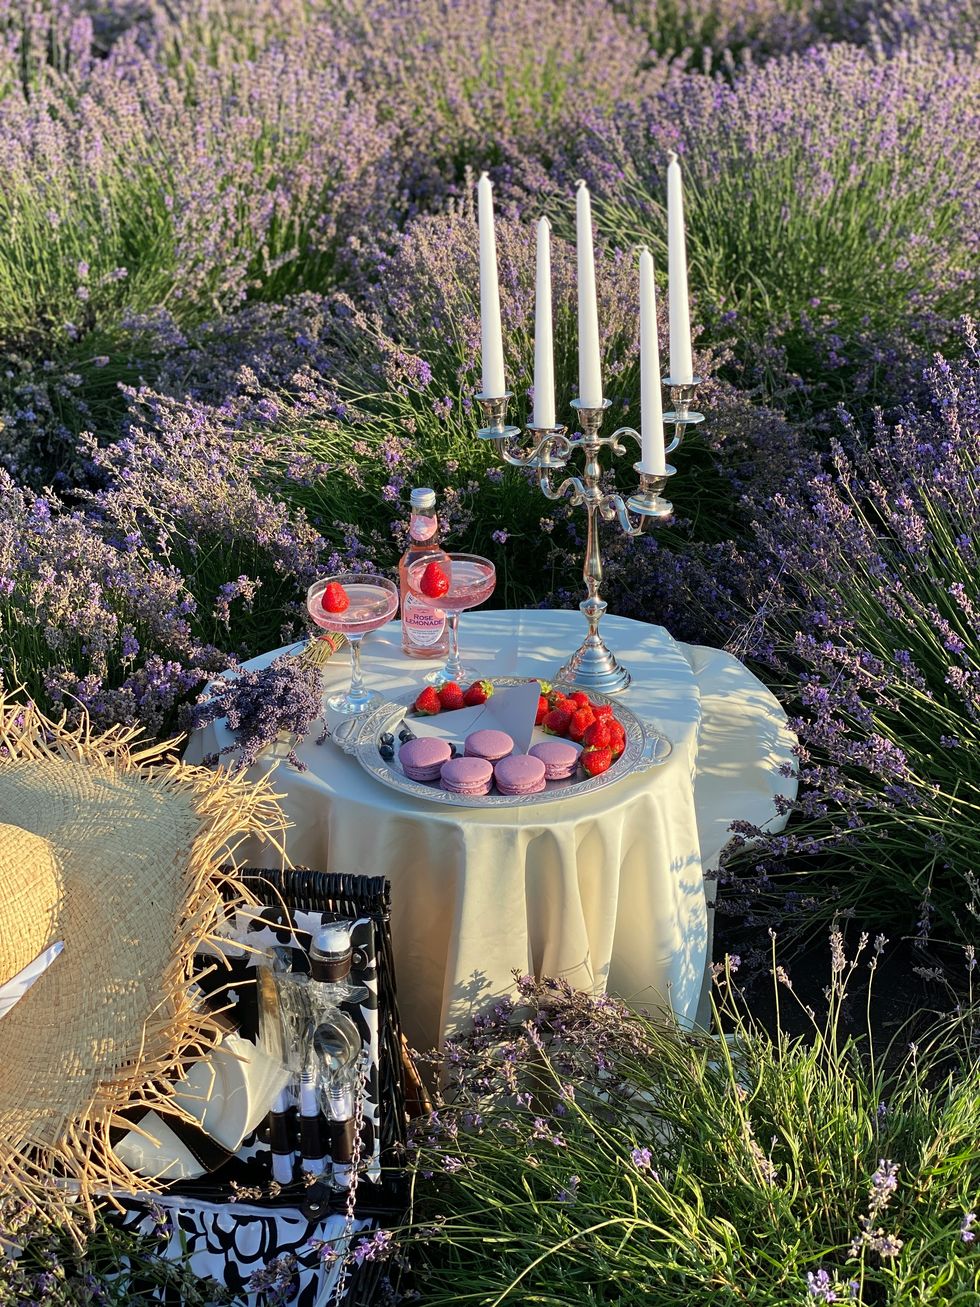 a table with food and candles on it surrounded by plants